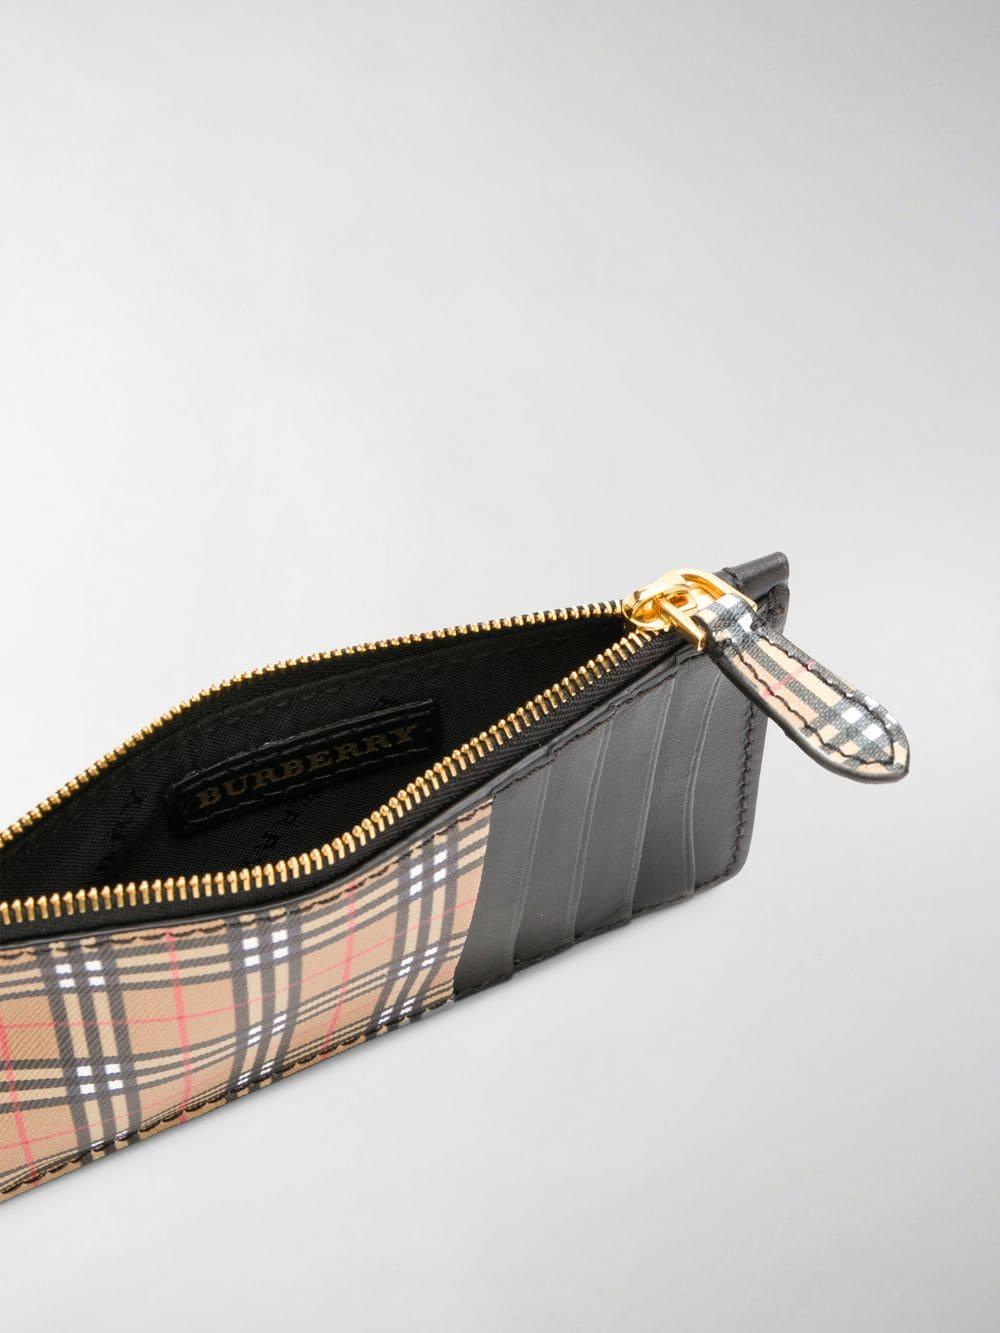 Burberry Vintage Check And Leather Zip Cardholder - Lyst